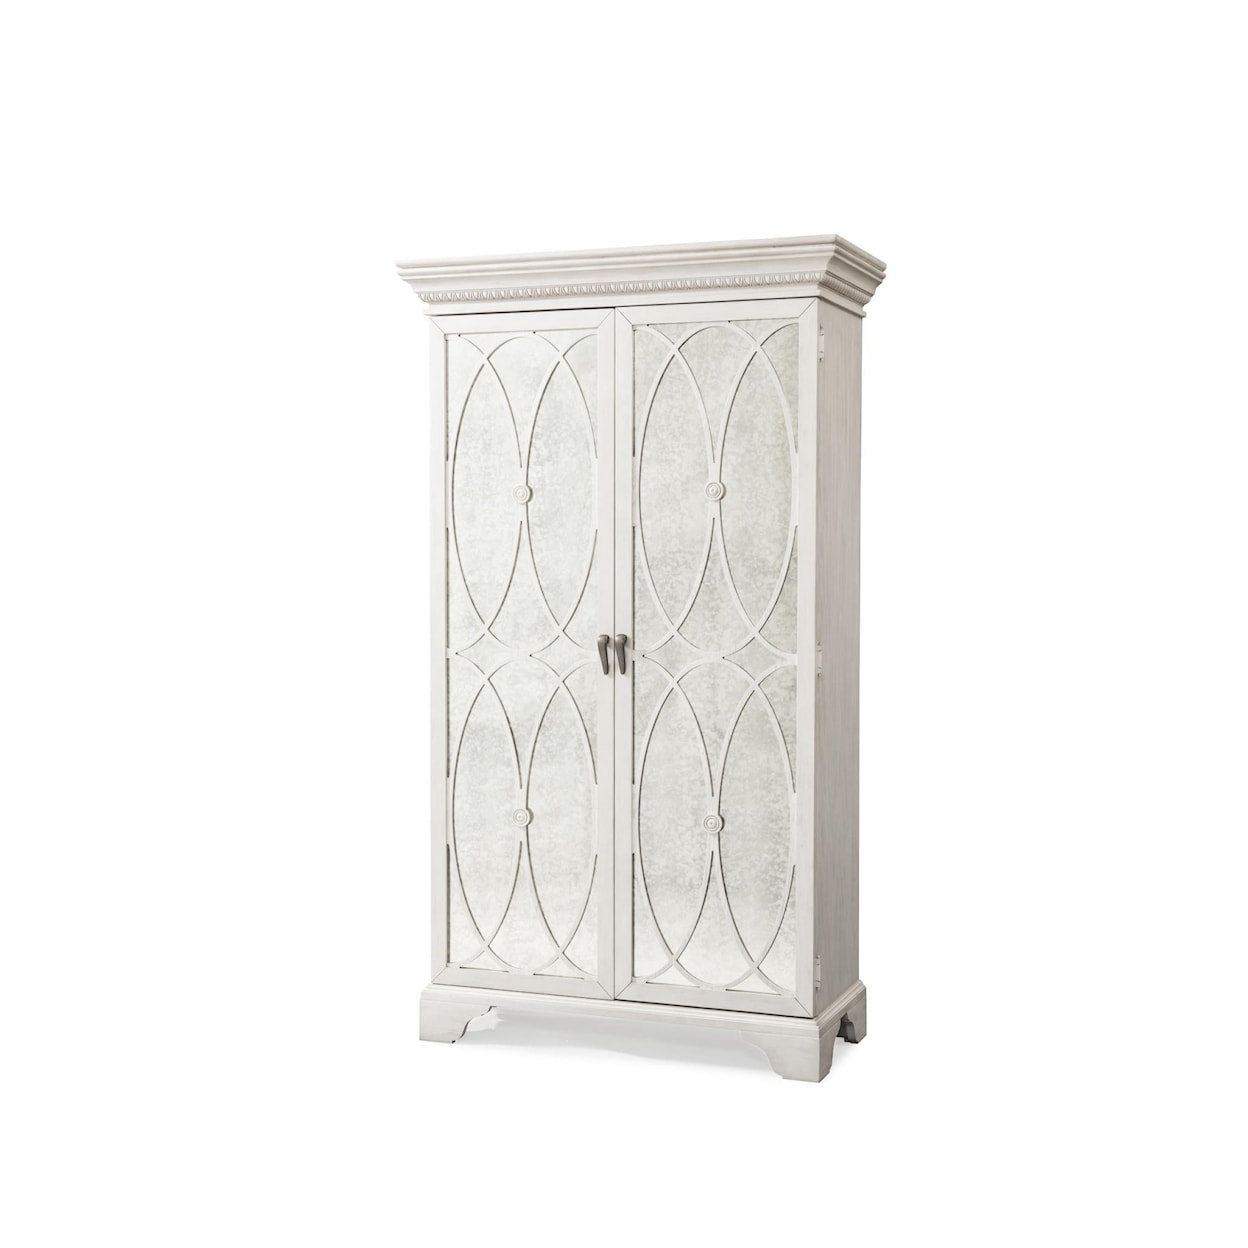 Trisha Yearwood Home Collection by Legacy Classic Jasper County Armoire